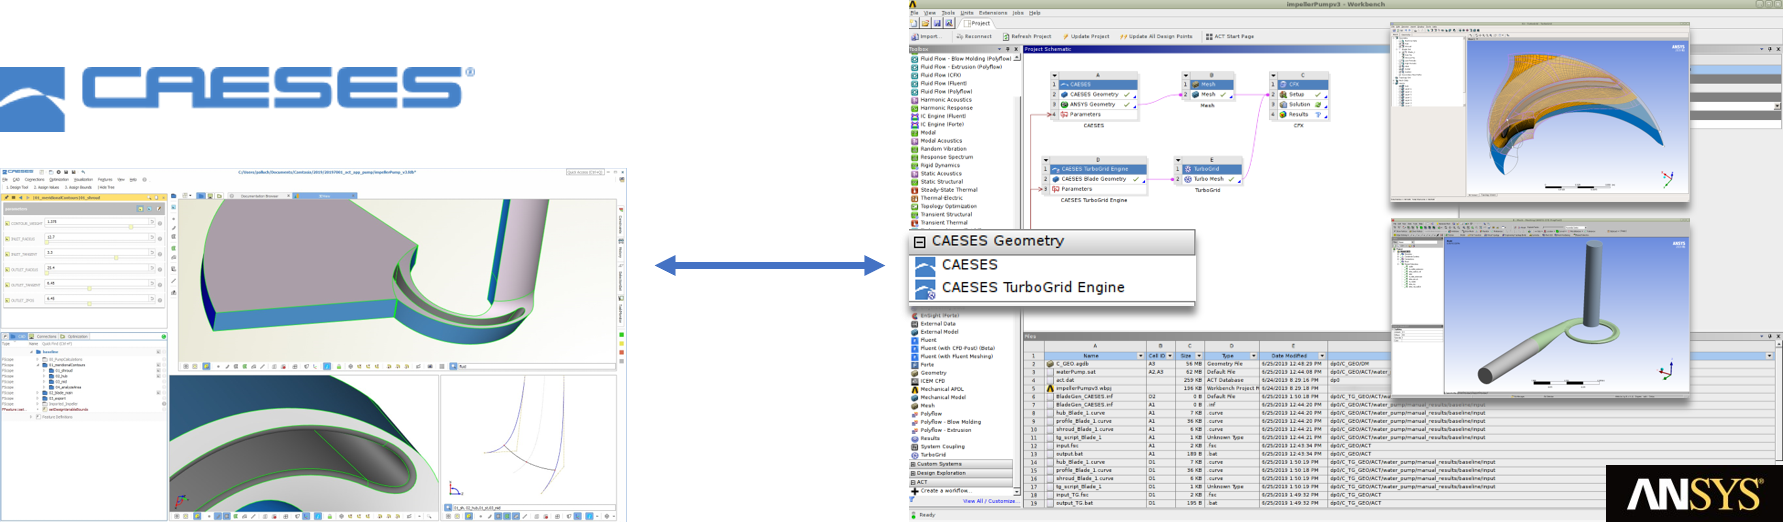 ANSYS geometry interface with CAESES